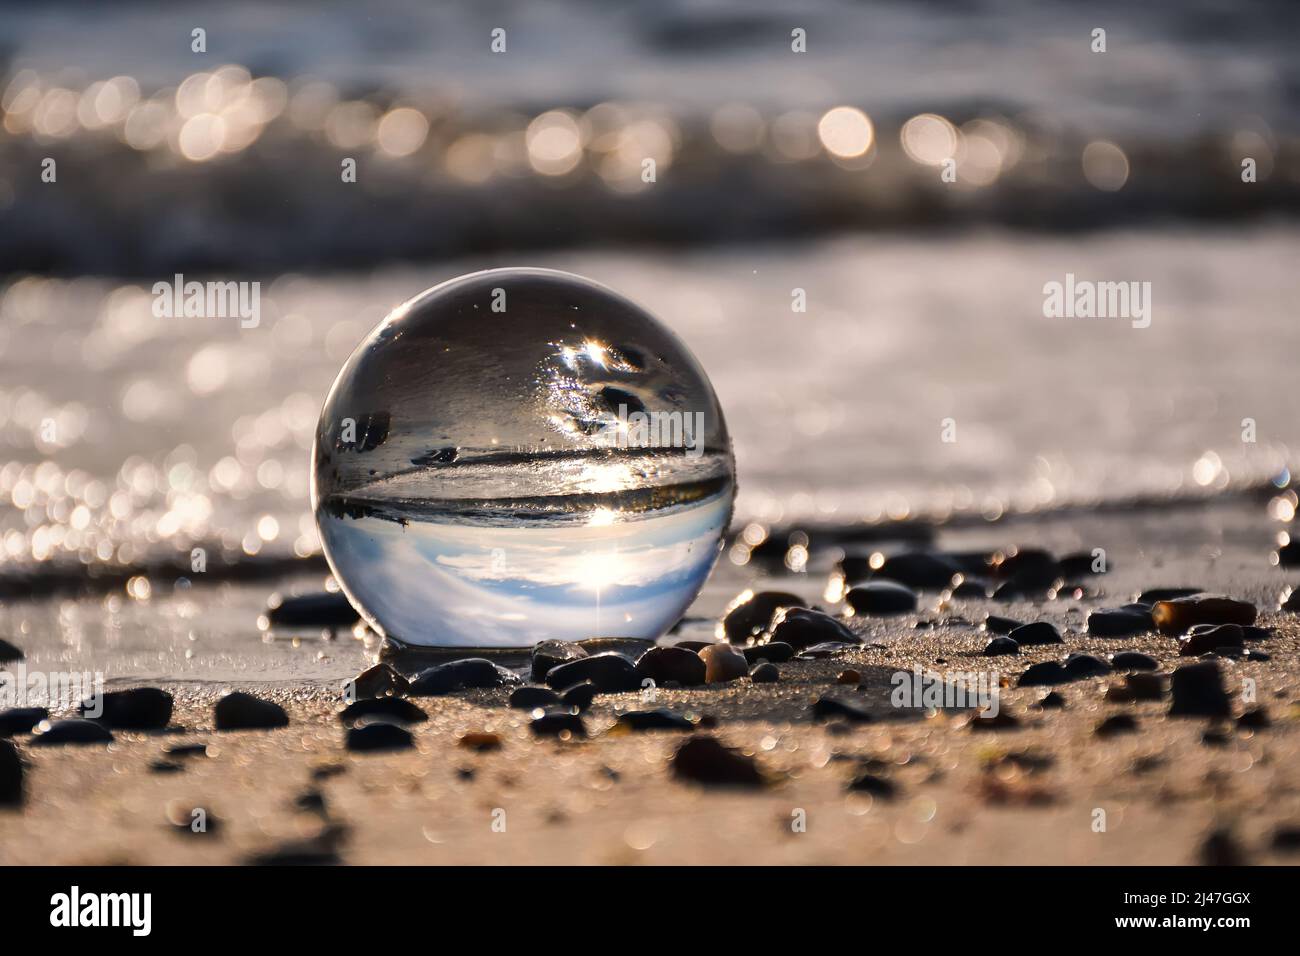 Abstract holiday seaside idea. Sea landscape held in a glass ball with a blurred background. Stock Photo